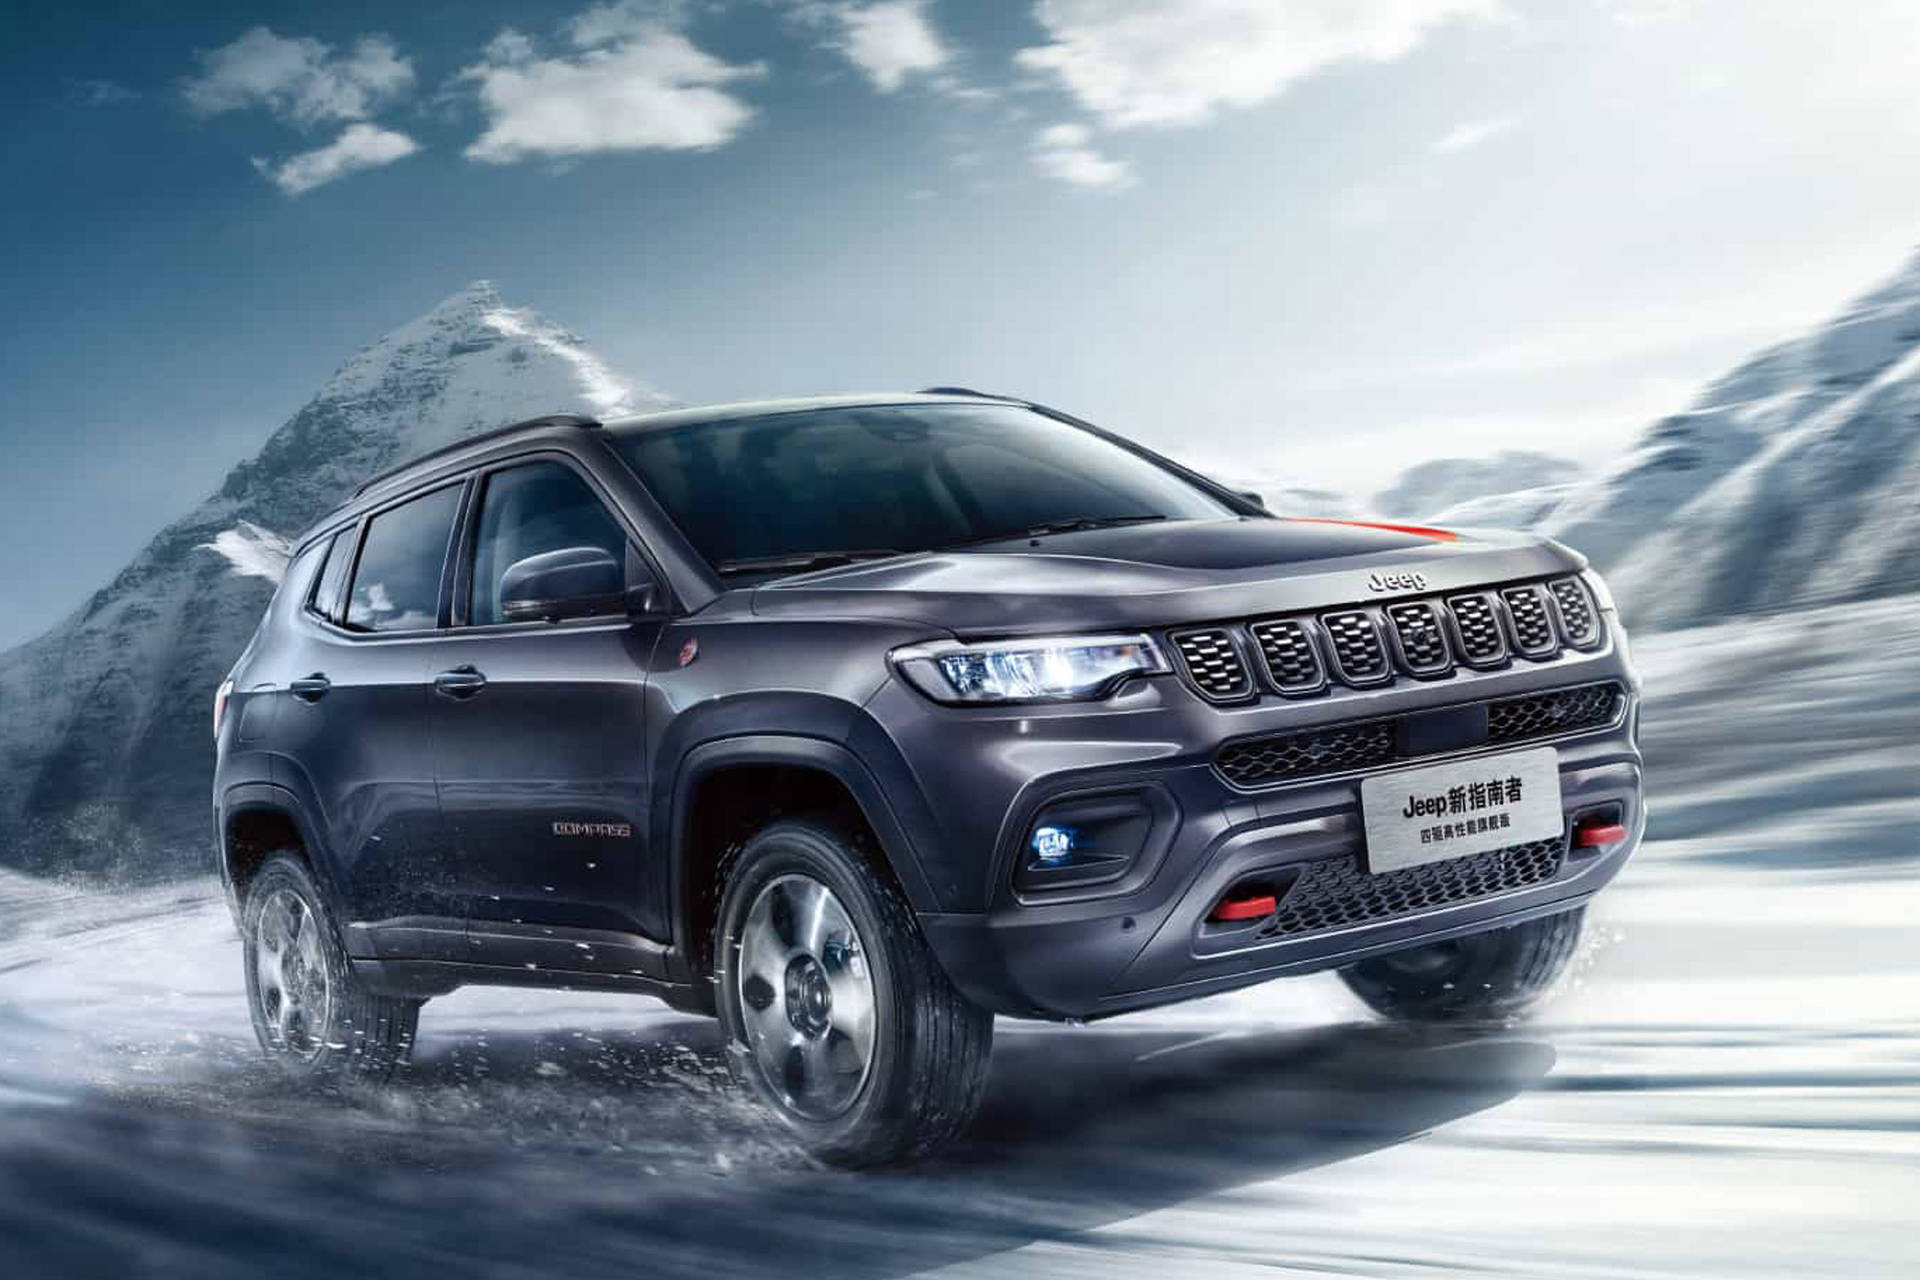 Jeep Compass On Snow With Mountains Wallpaper